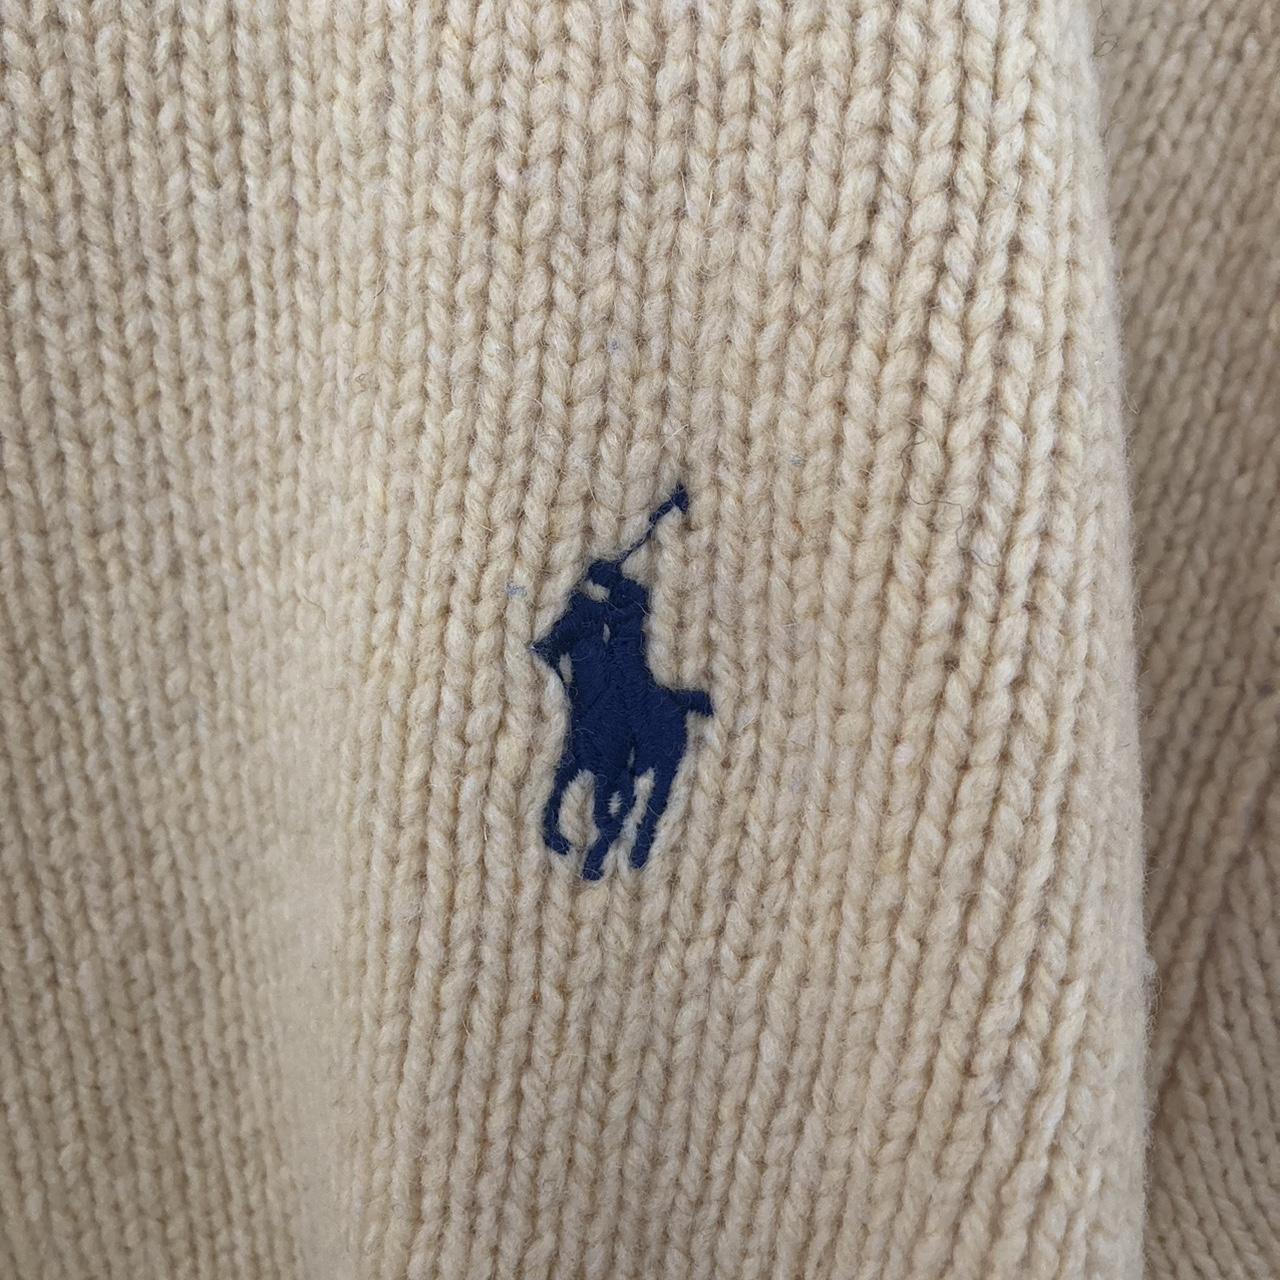 Extra large yellow Polo wool sweater, in great... - Depop